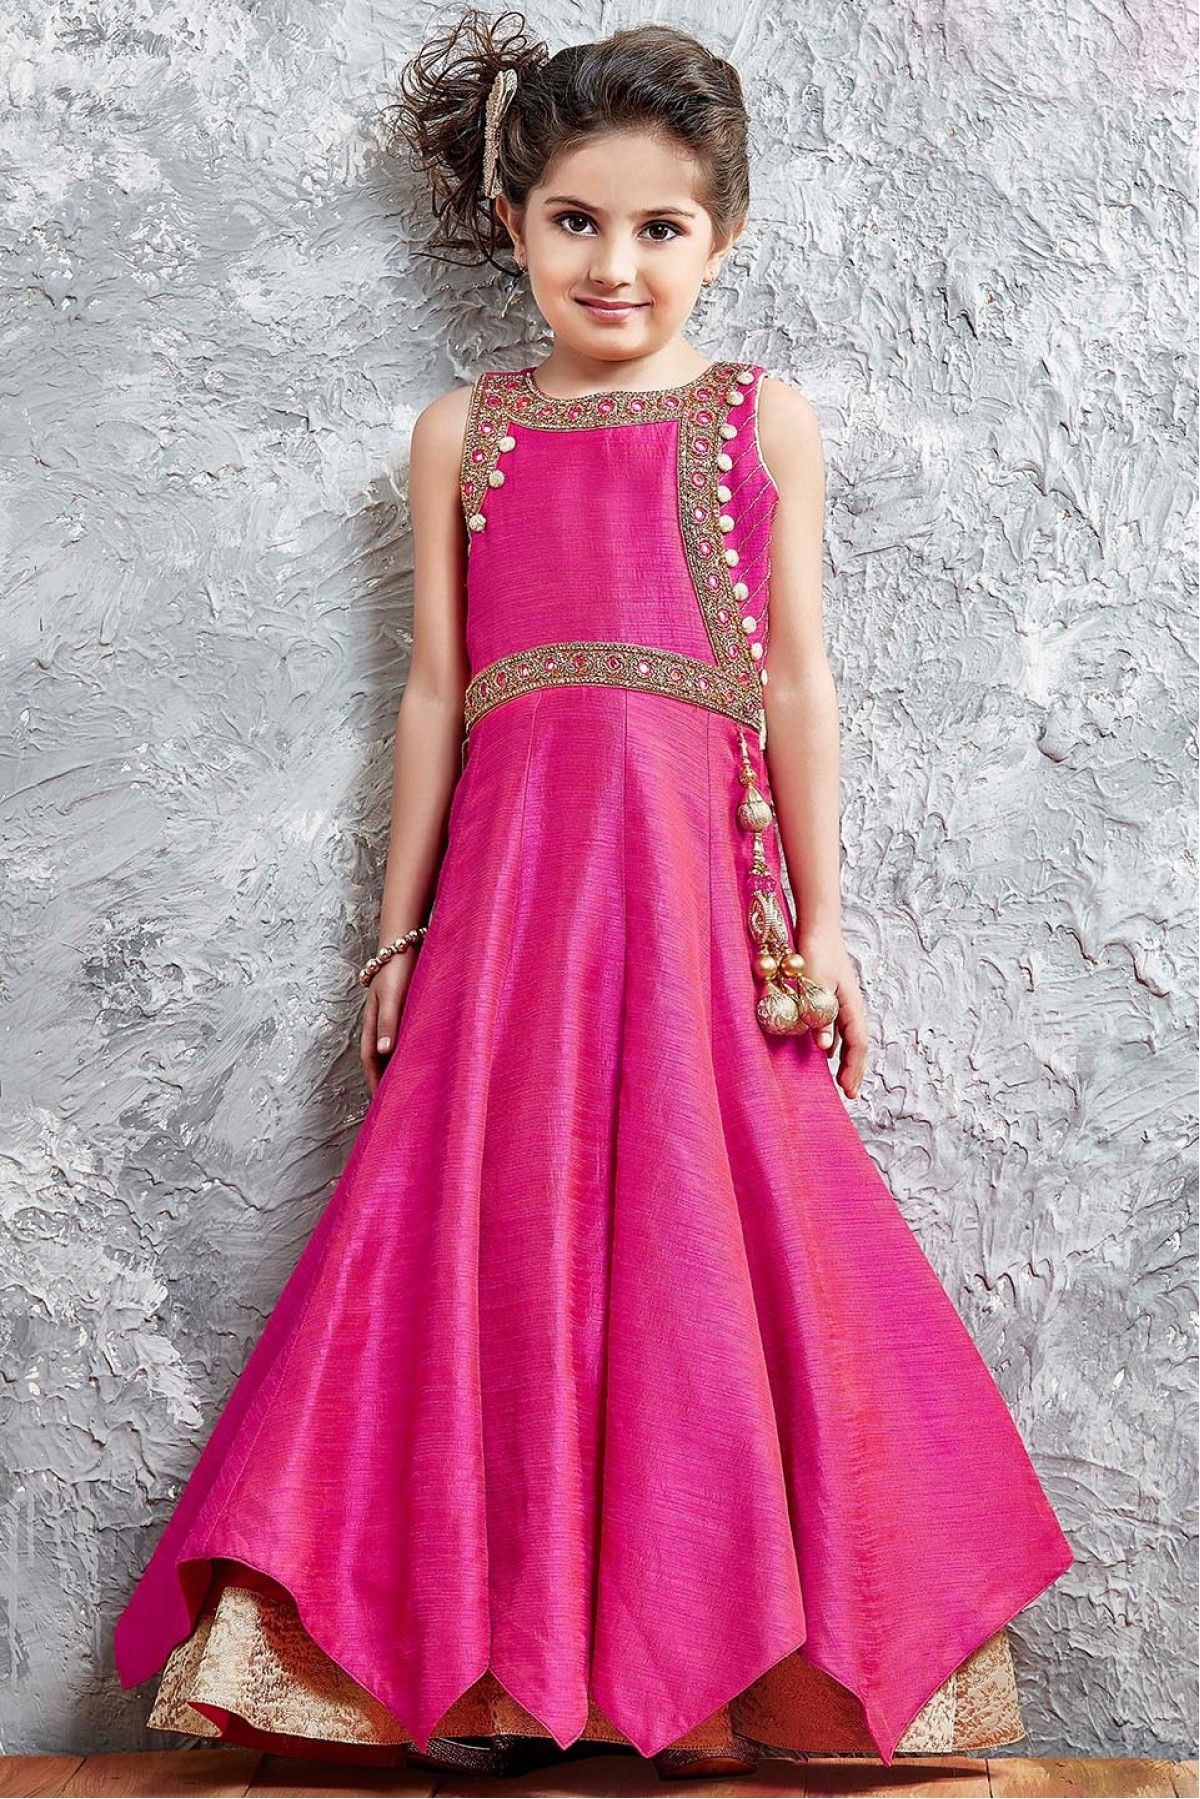 Kids Party Dresses India
 Pin by Big Fashion GiG on Gown